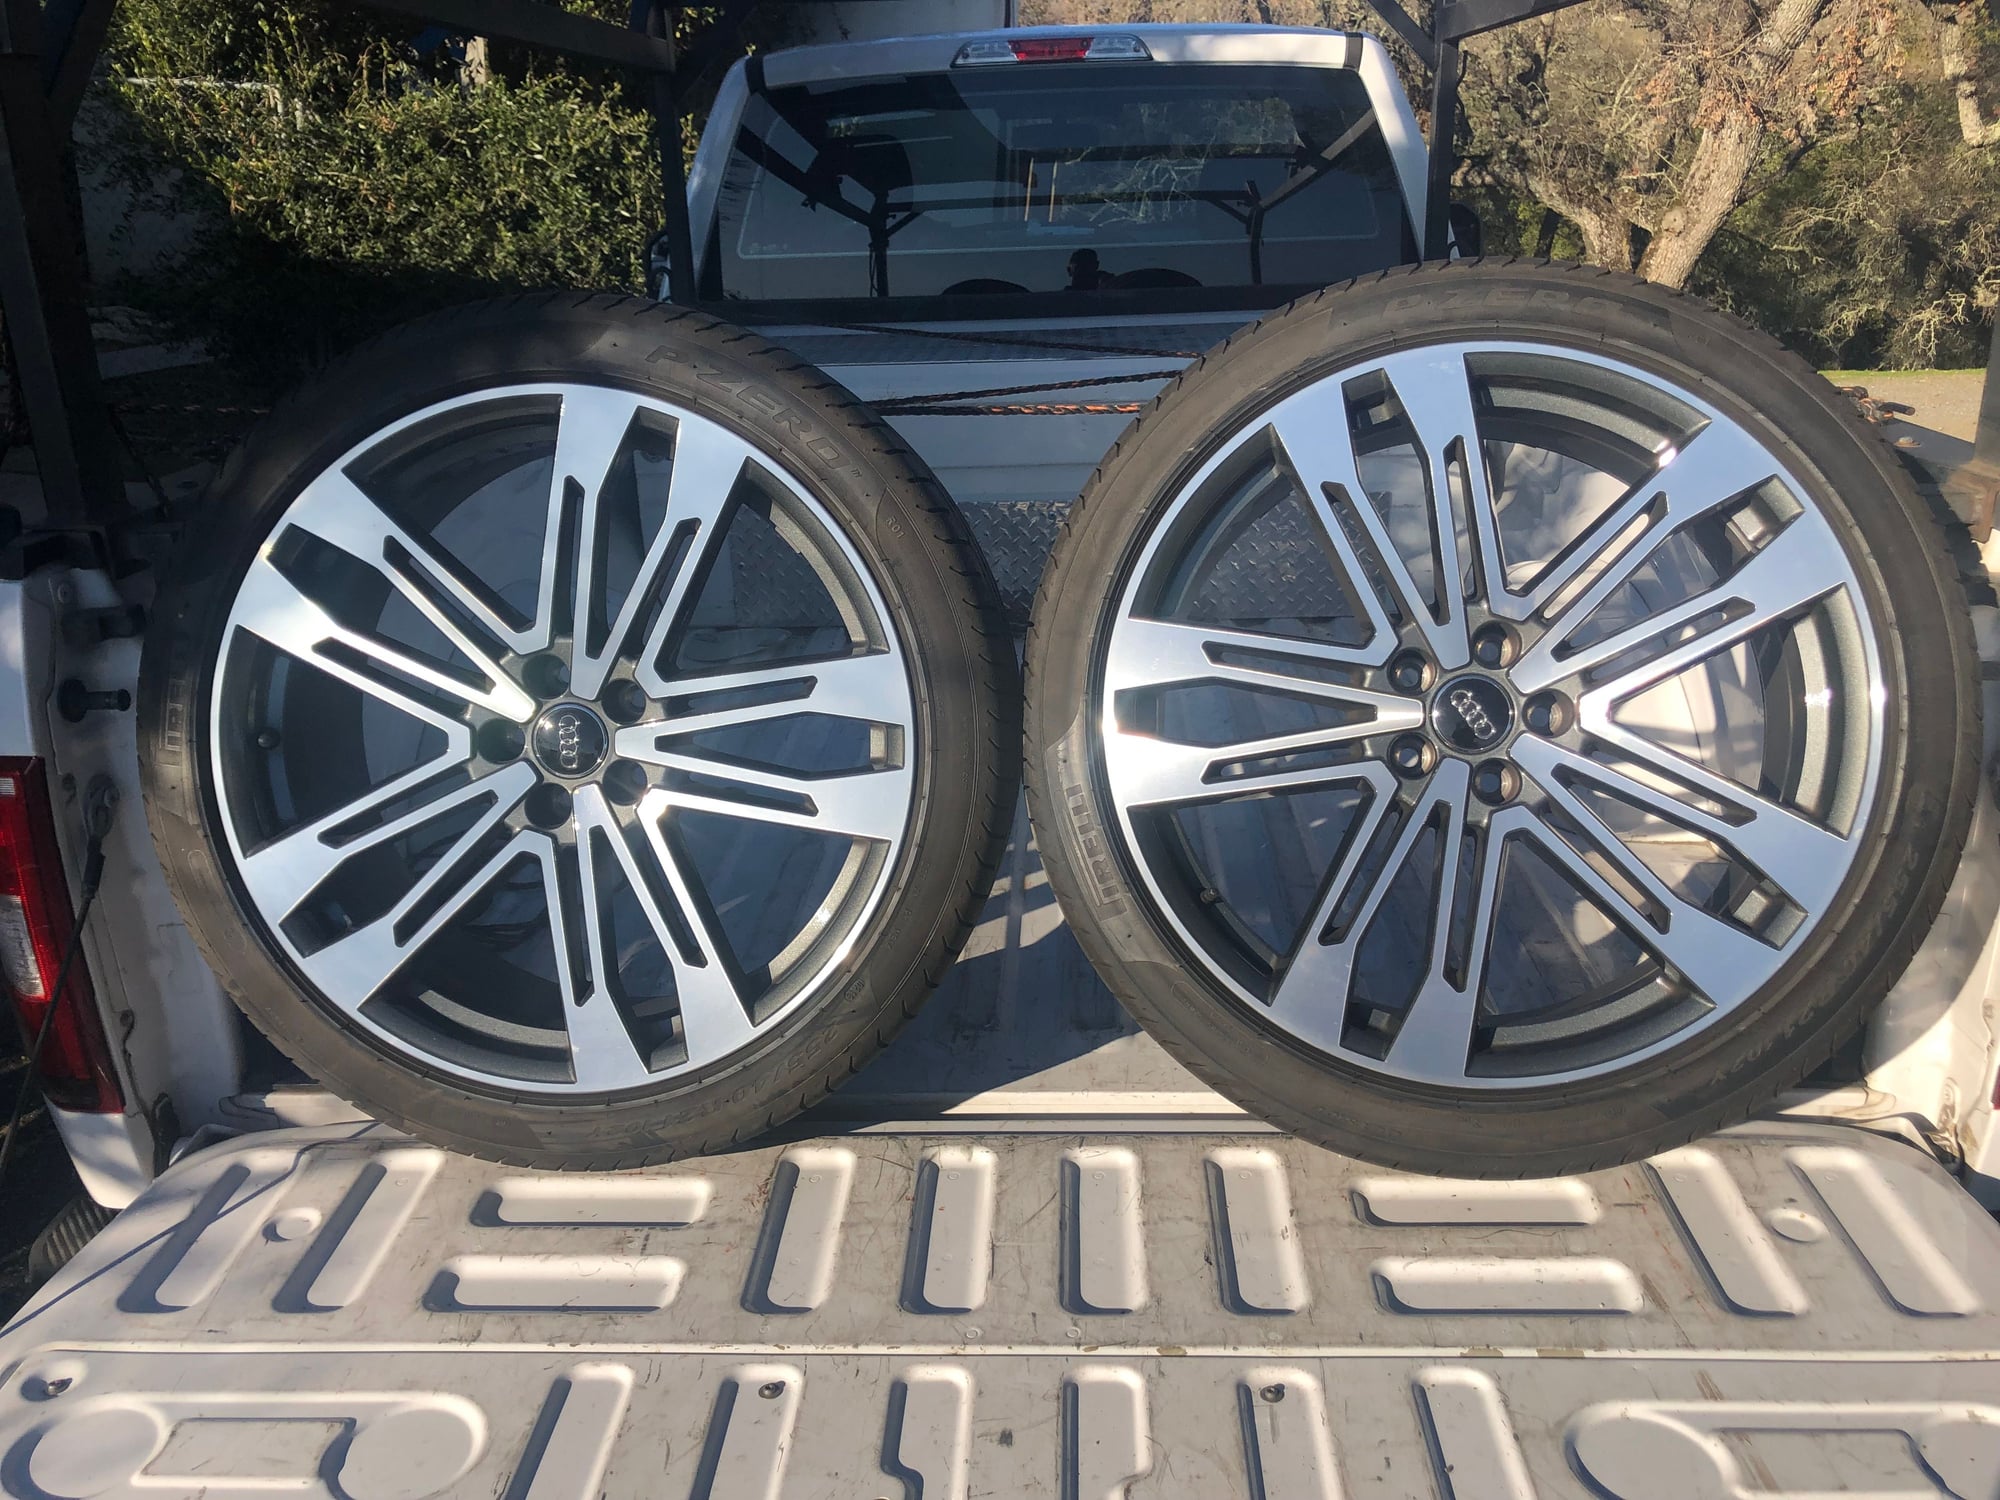 Wheels and Tires/Axles - 21” Wheel Deal - Used - 2019 Audi SQ5 - San Jose, CA 95106, United States